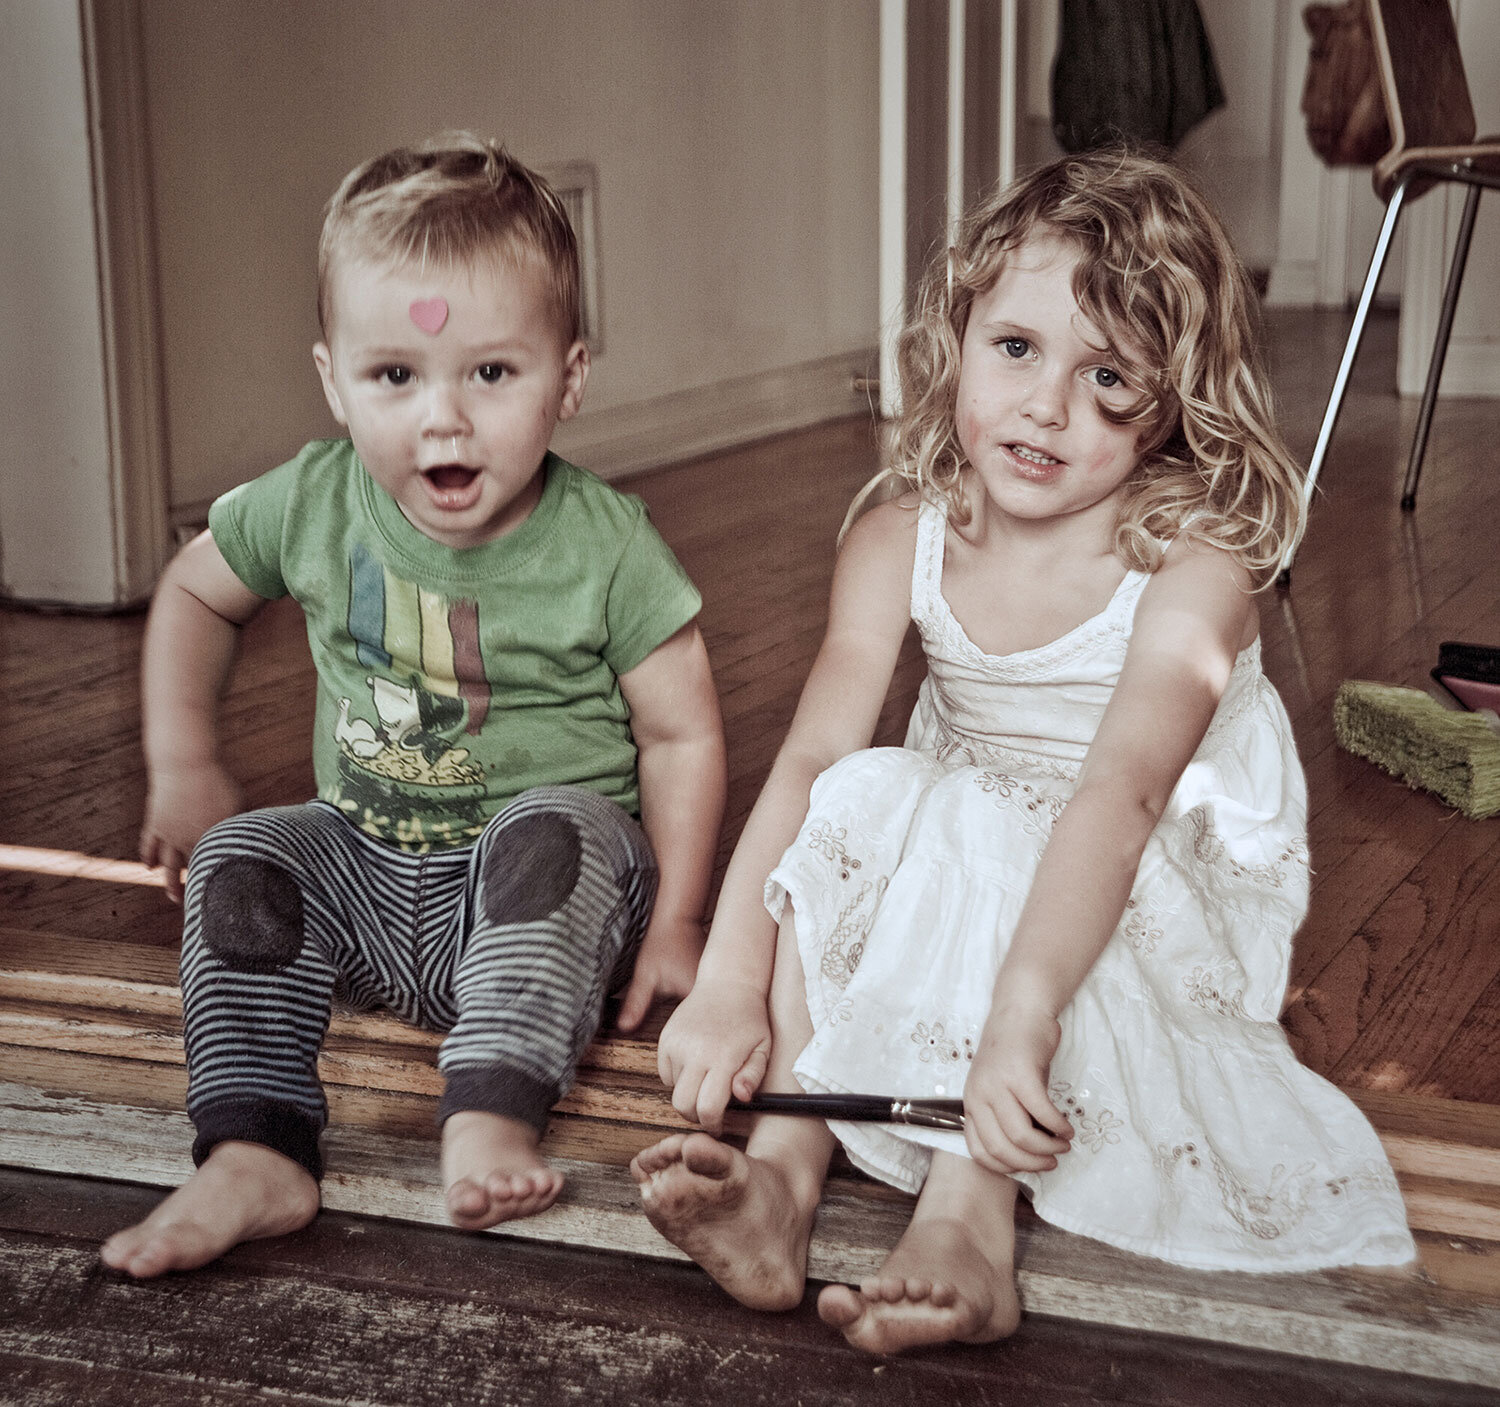  Children and Family Portraits by Bryony Shearmur Photography  